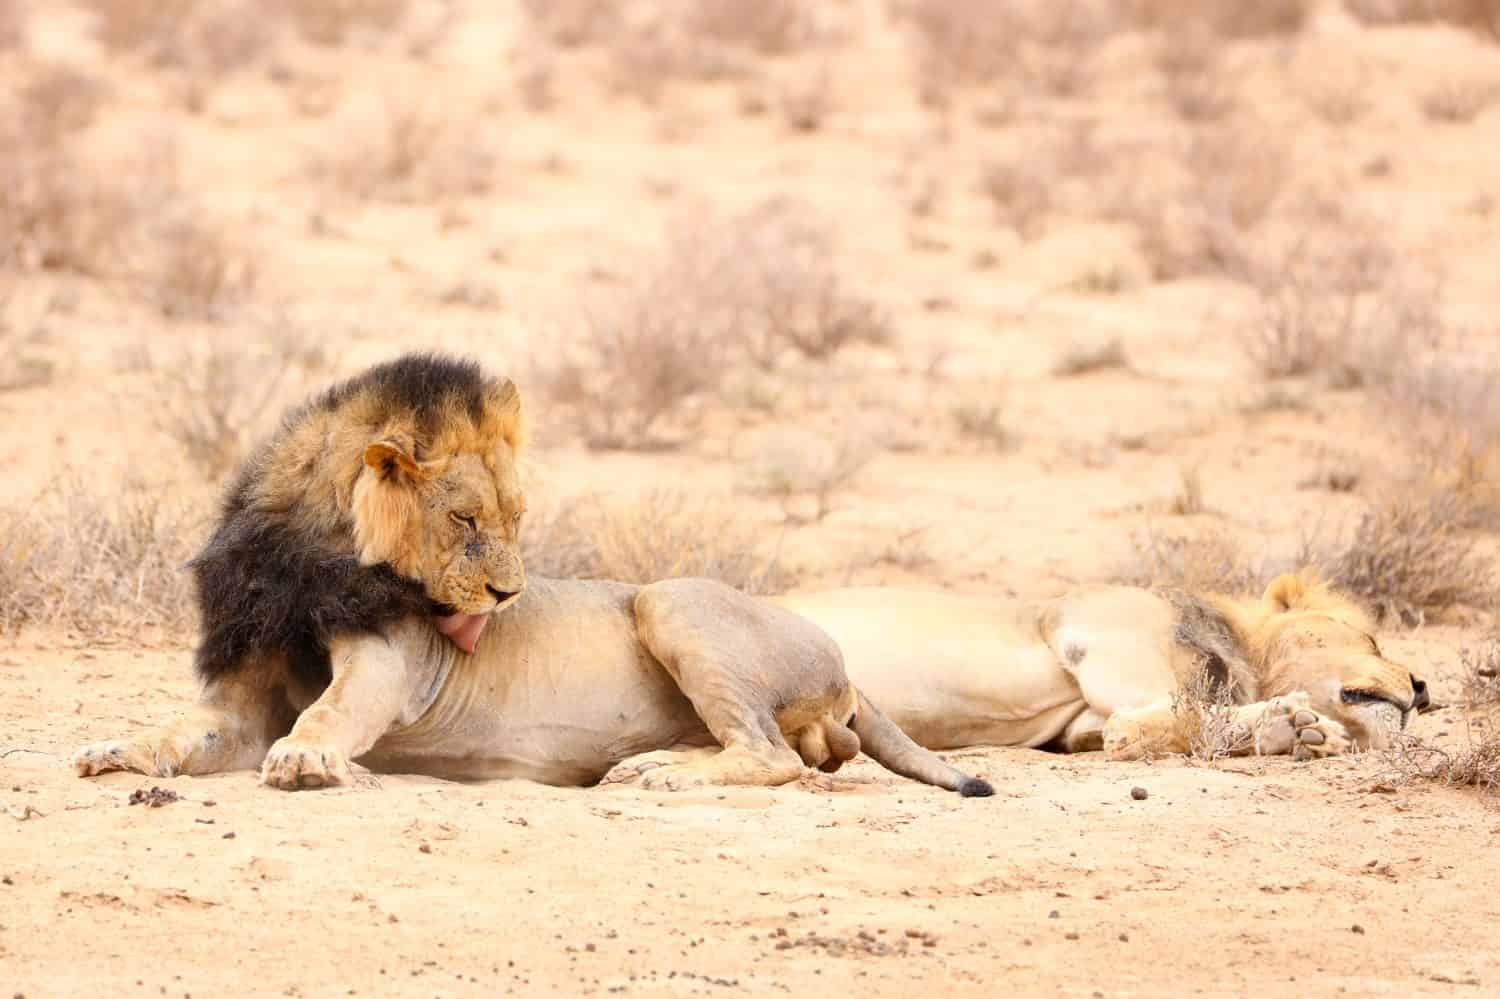 Black-maned male lion licking its fur while lying on the sand of the Kalahari Desert, South Africa